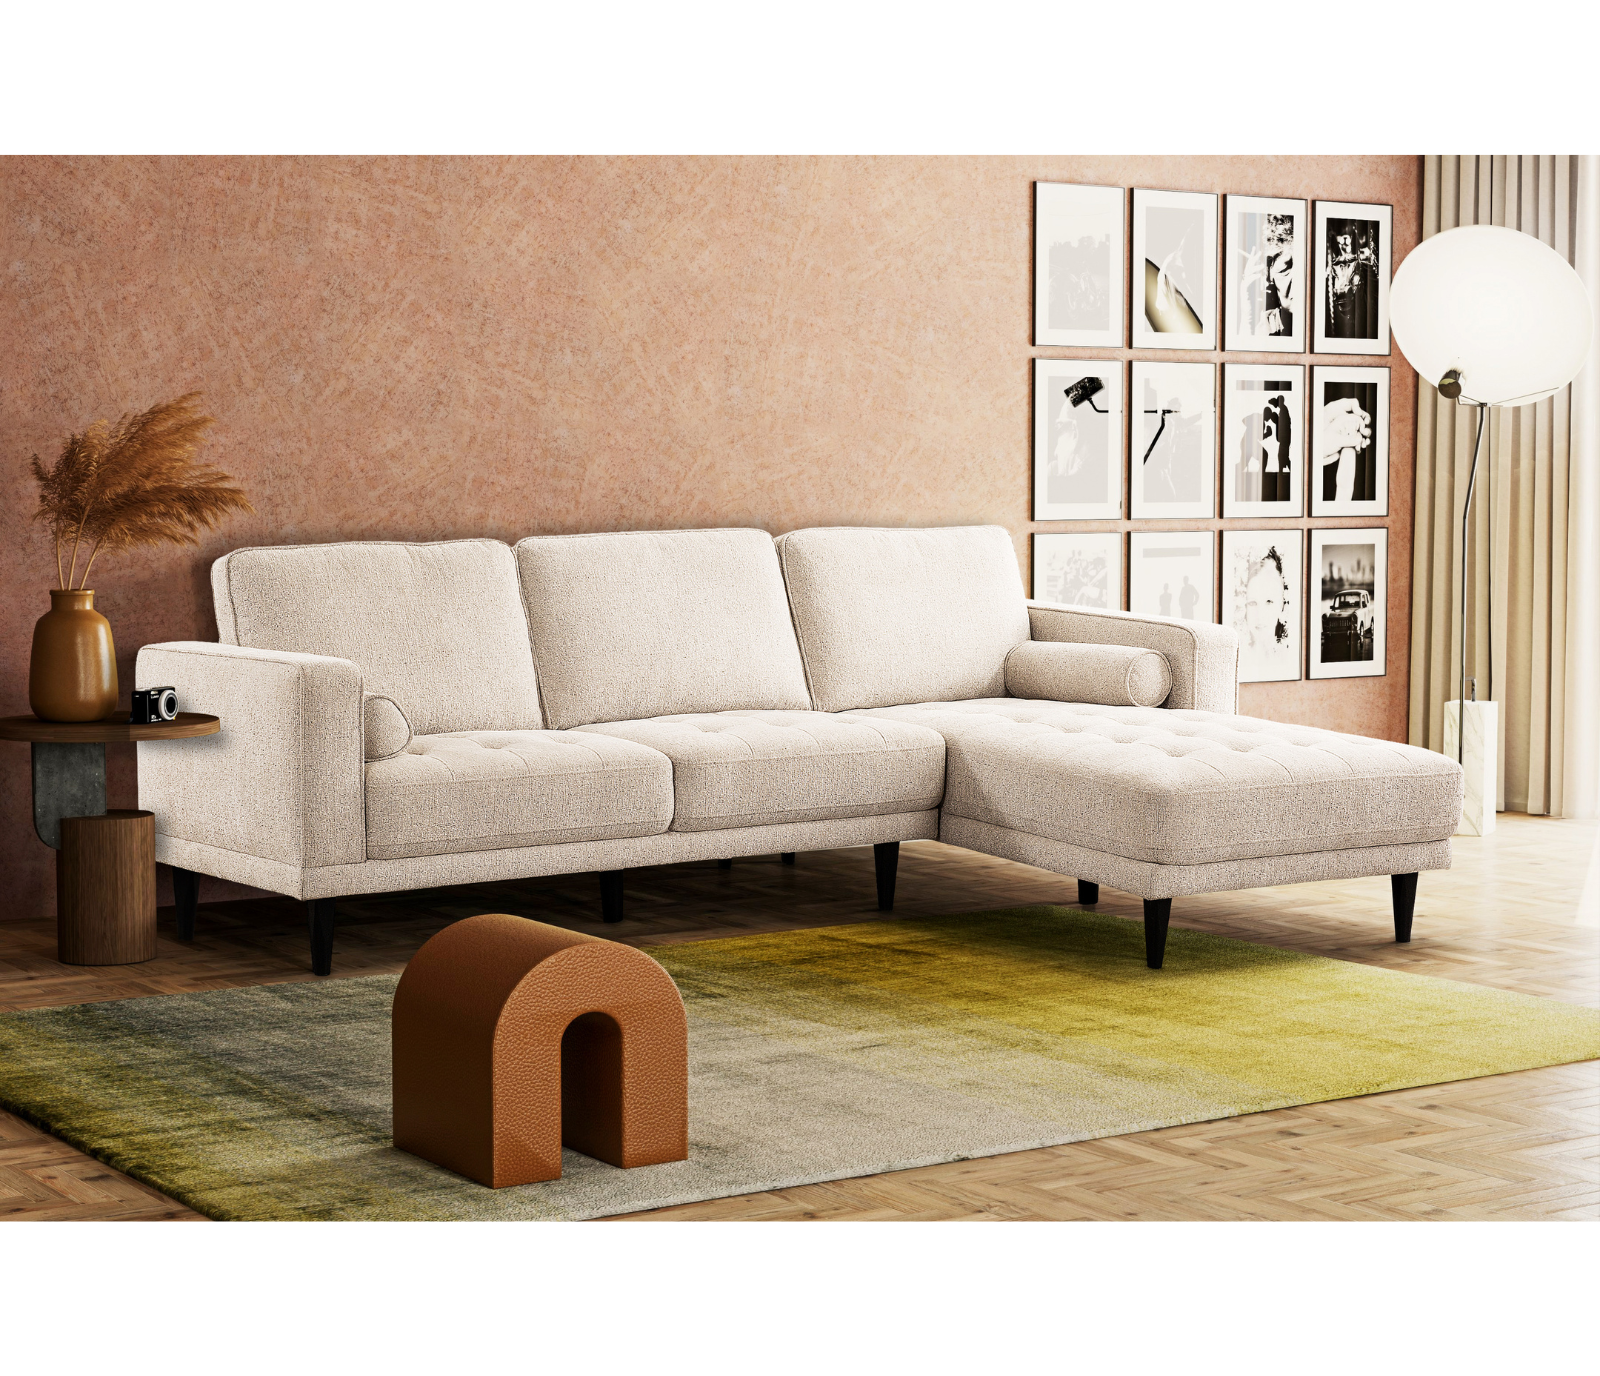 Reign 2 Piece Sectional - Oat Beige Fabric